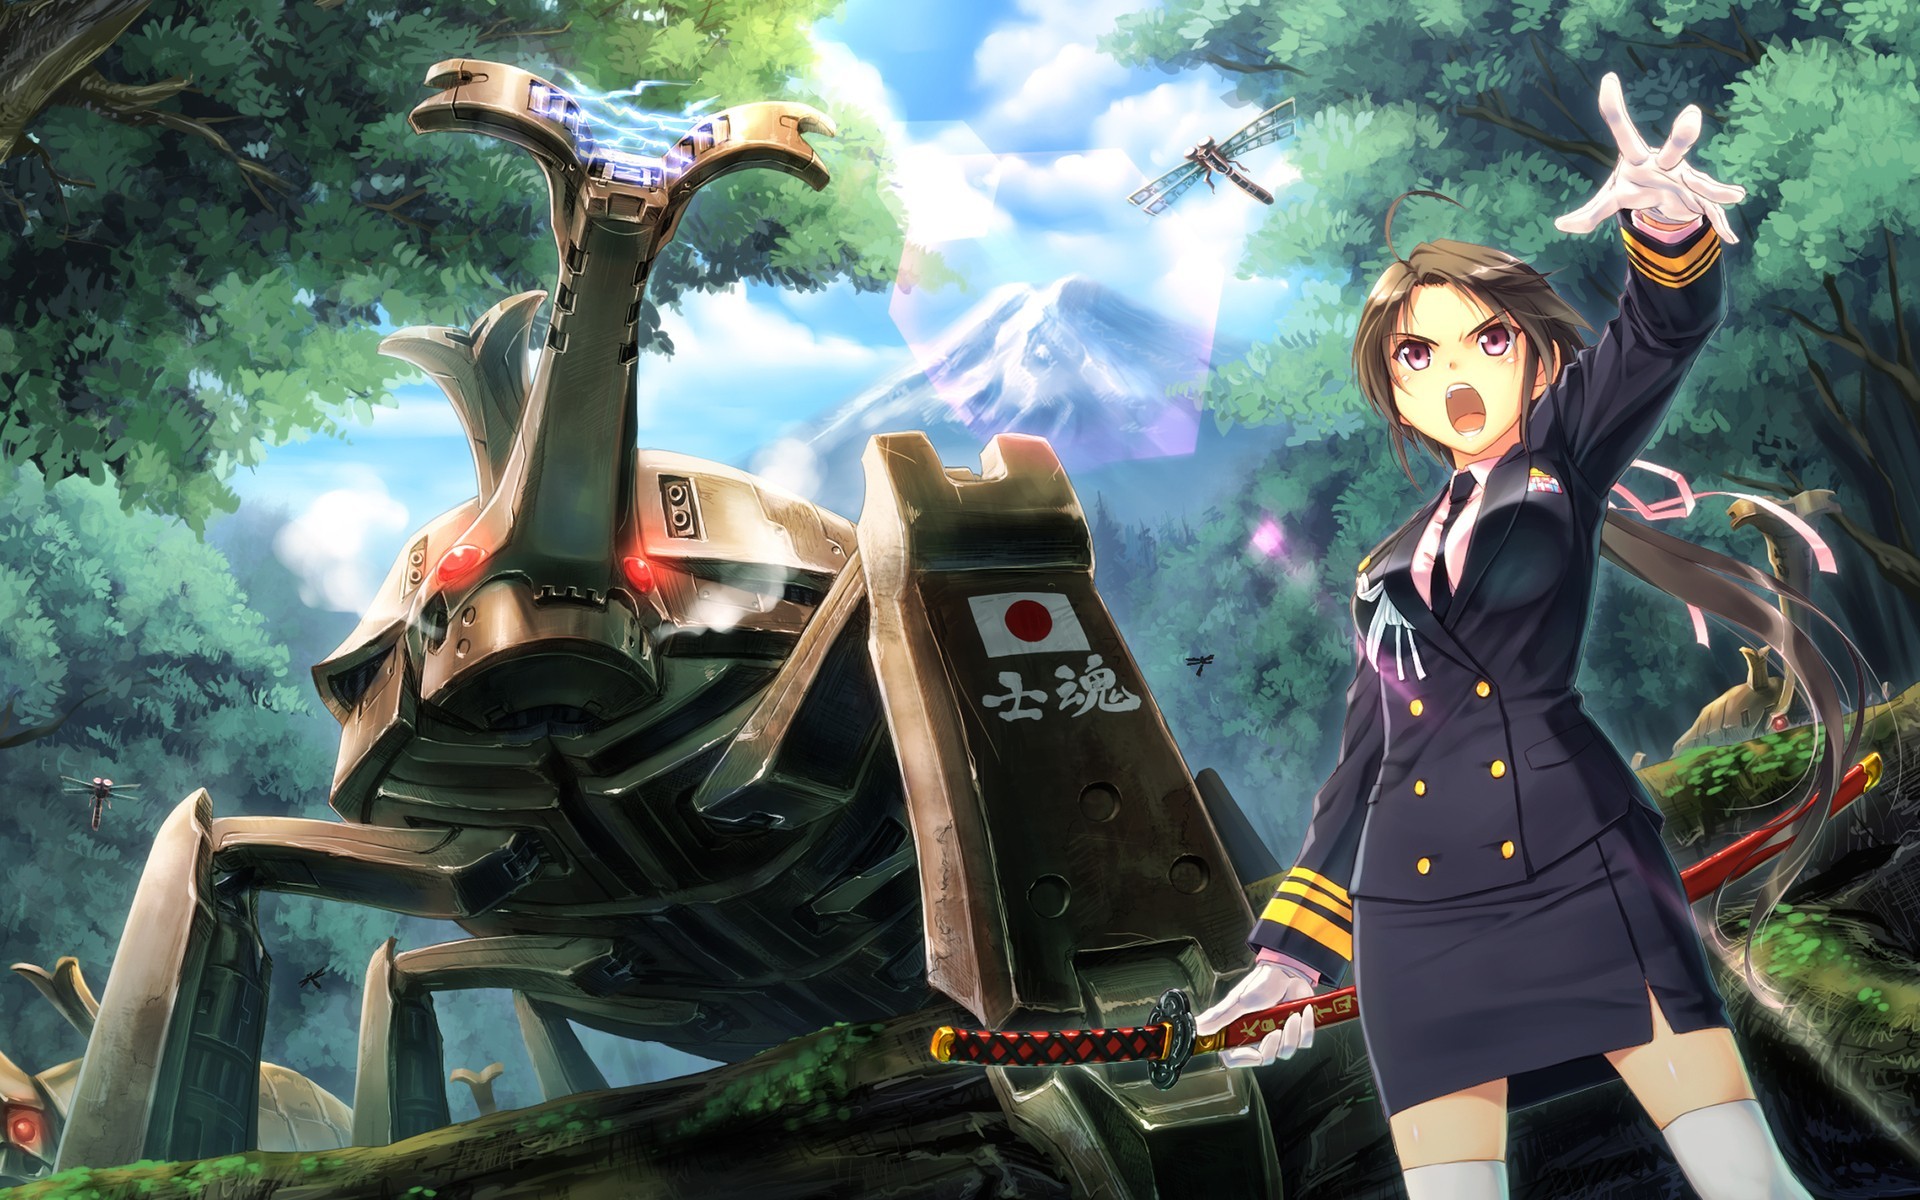 Anime 1920x1200 insect mechs dragonflies Japan anime girls anime digital art open mouth gloves white gloves katana women with swords sky clouds sunlight mountains long hair looking away standing ahoge trees forest uniform